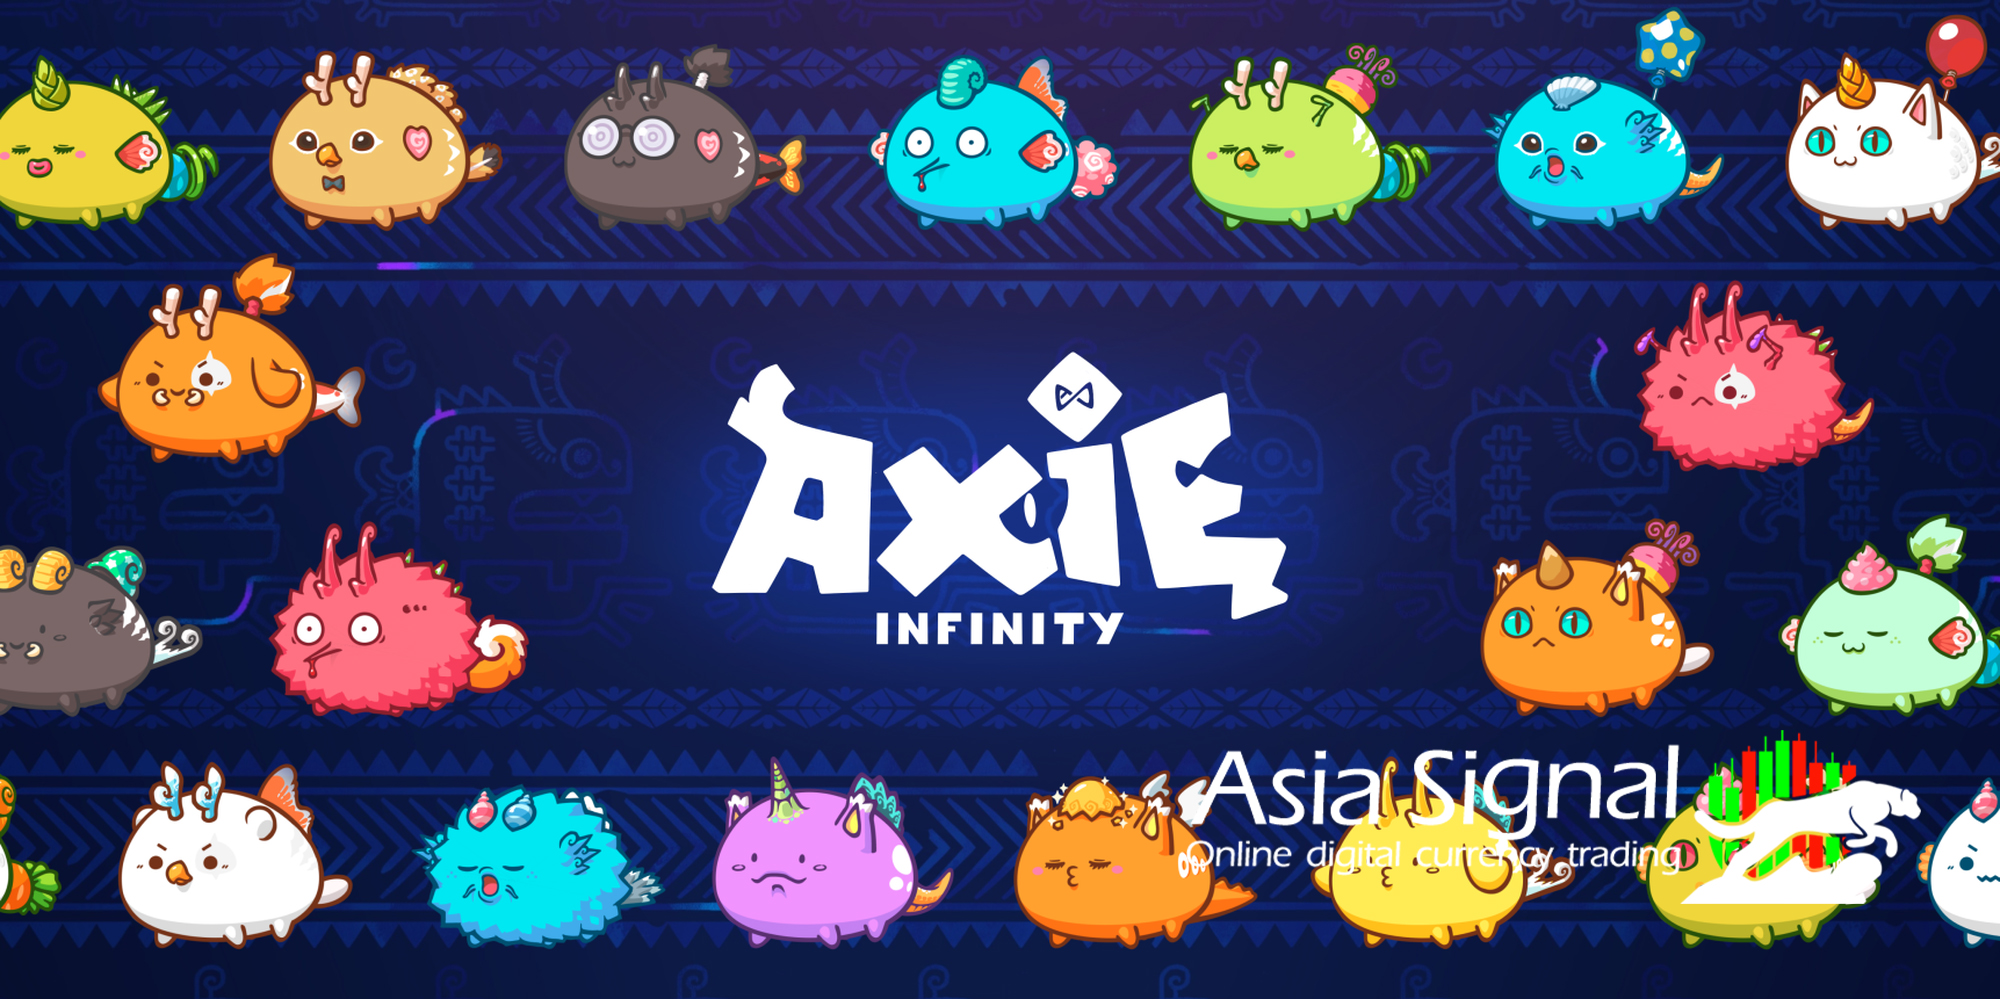  Axie Infinity is still at early stages